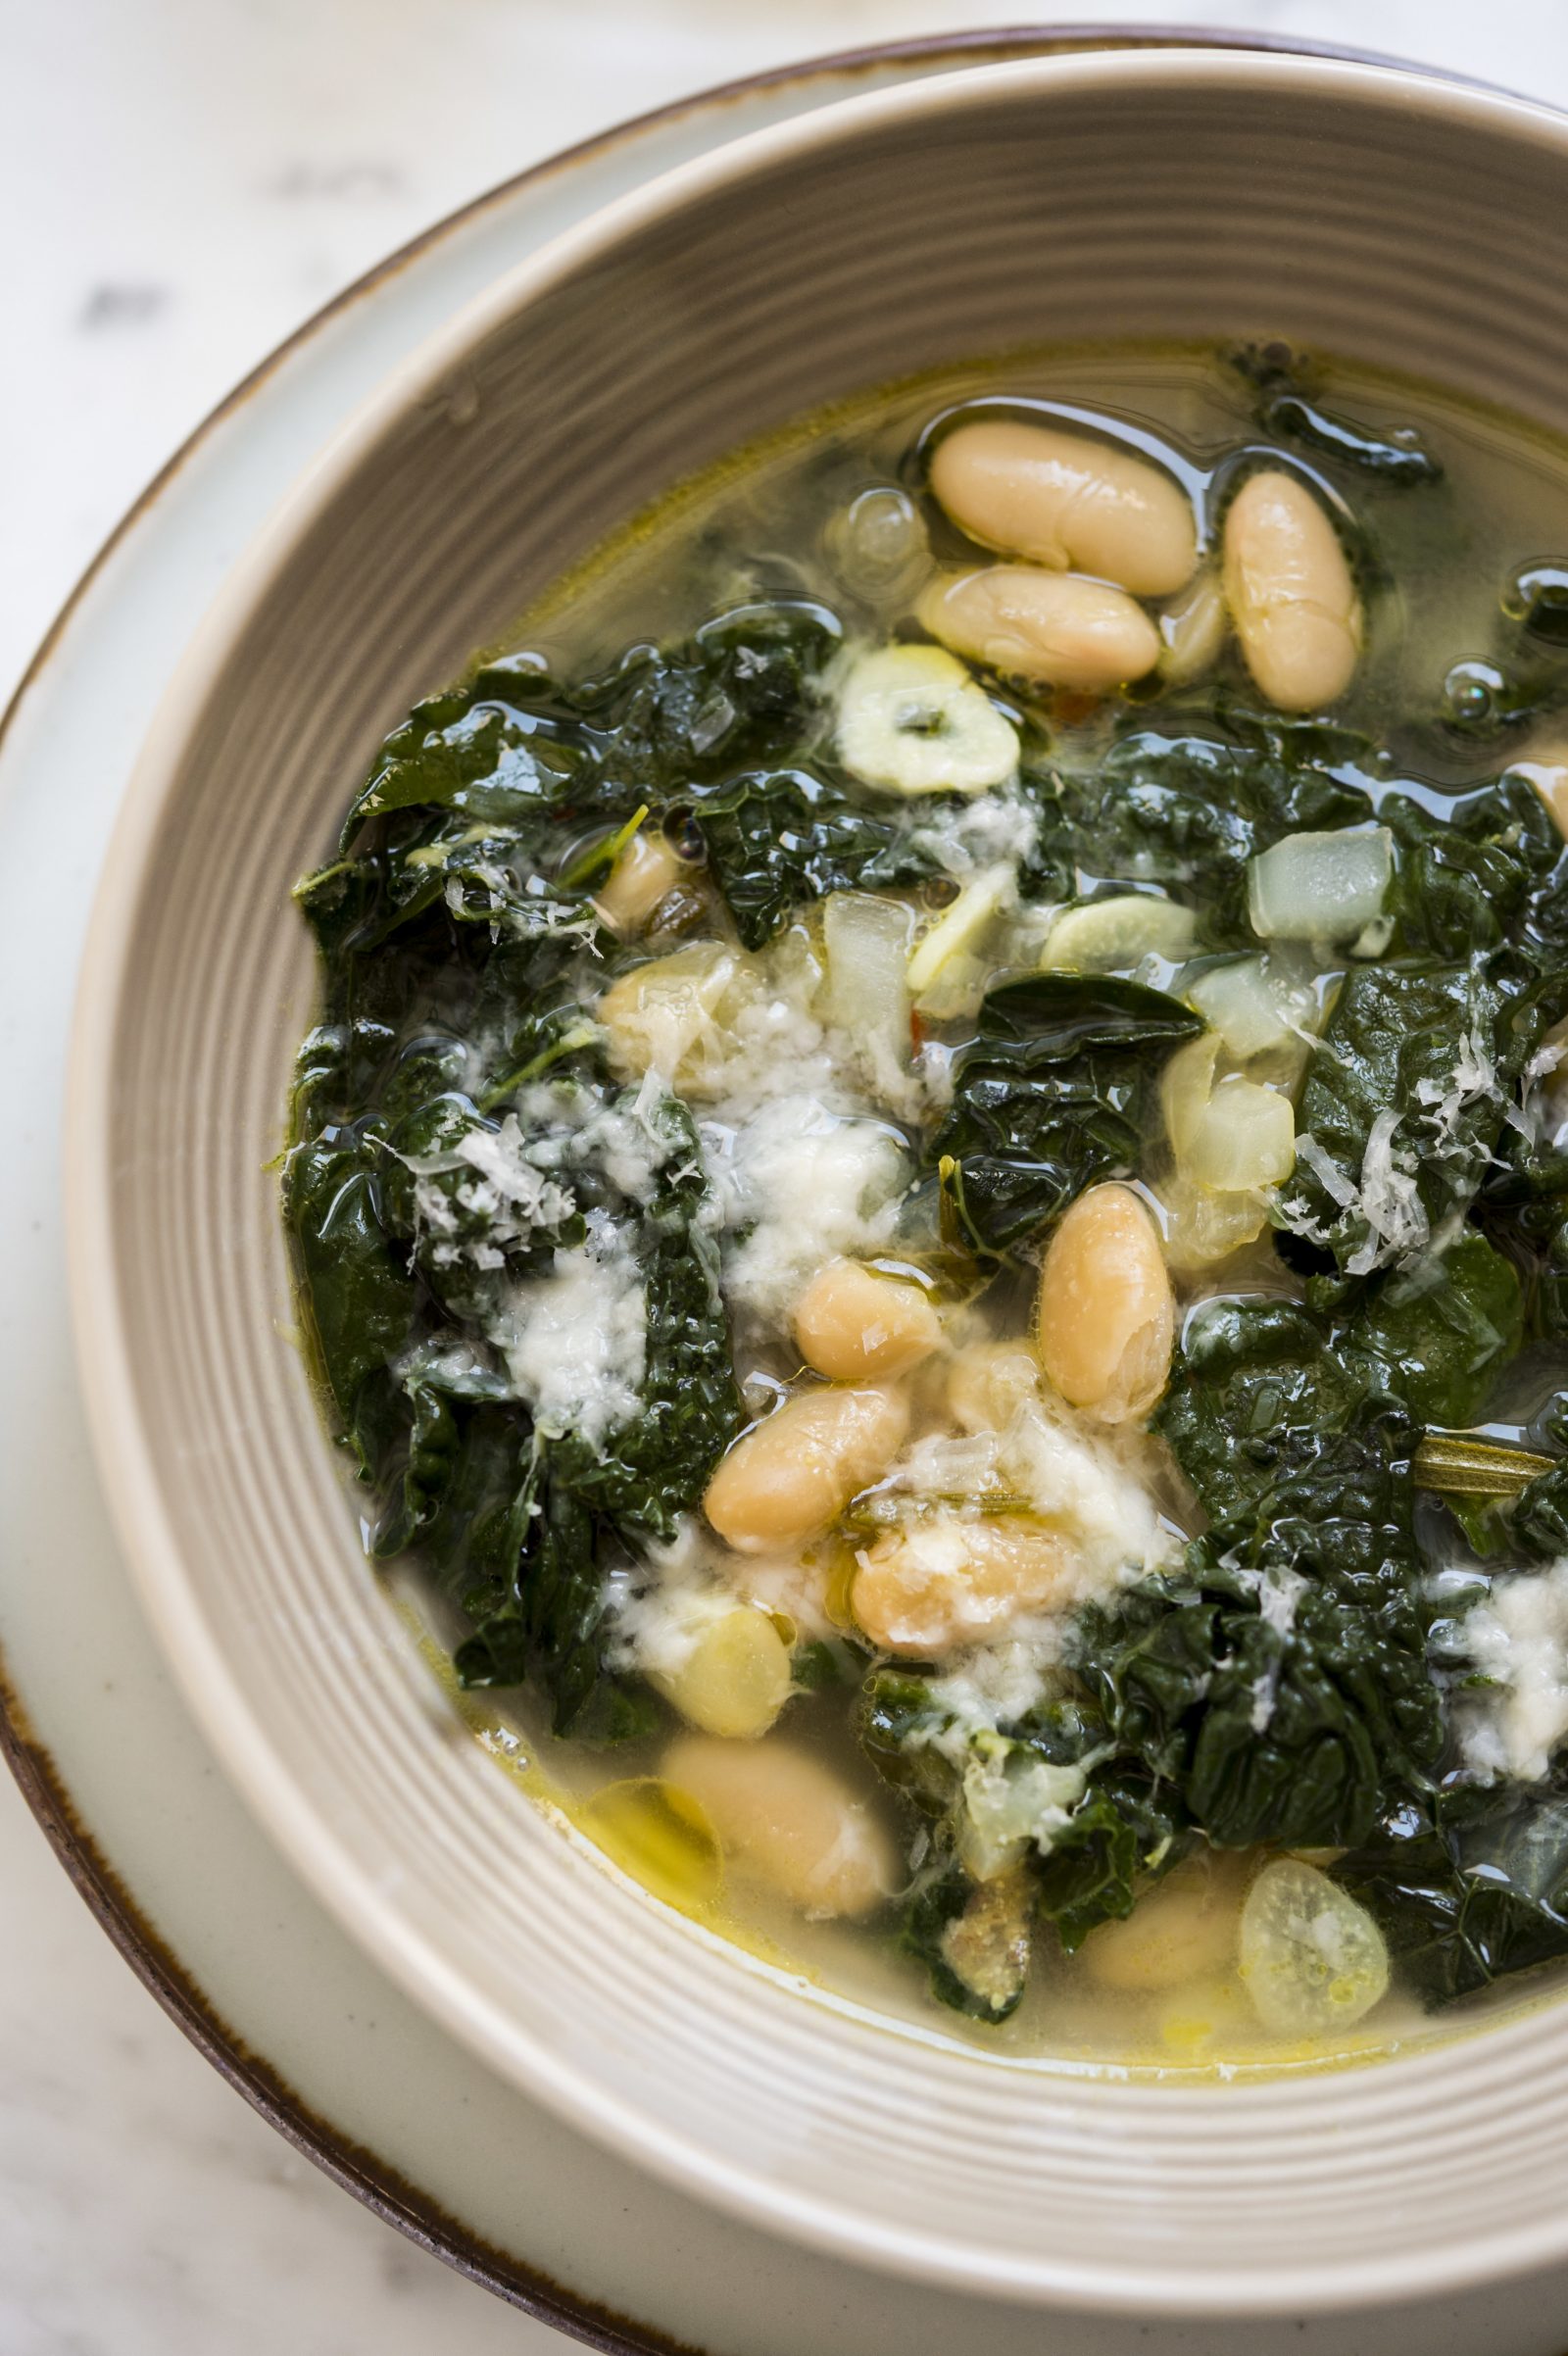 Best Kale and White Bean Soup Recipe - How to Make Kale and White Bean Soup